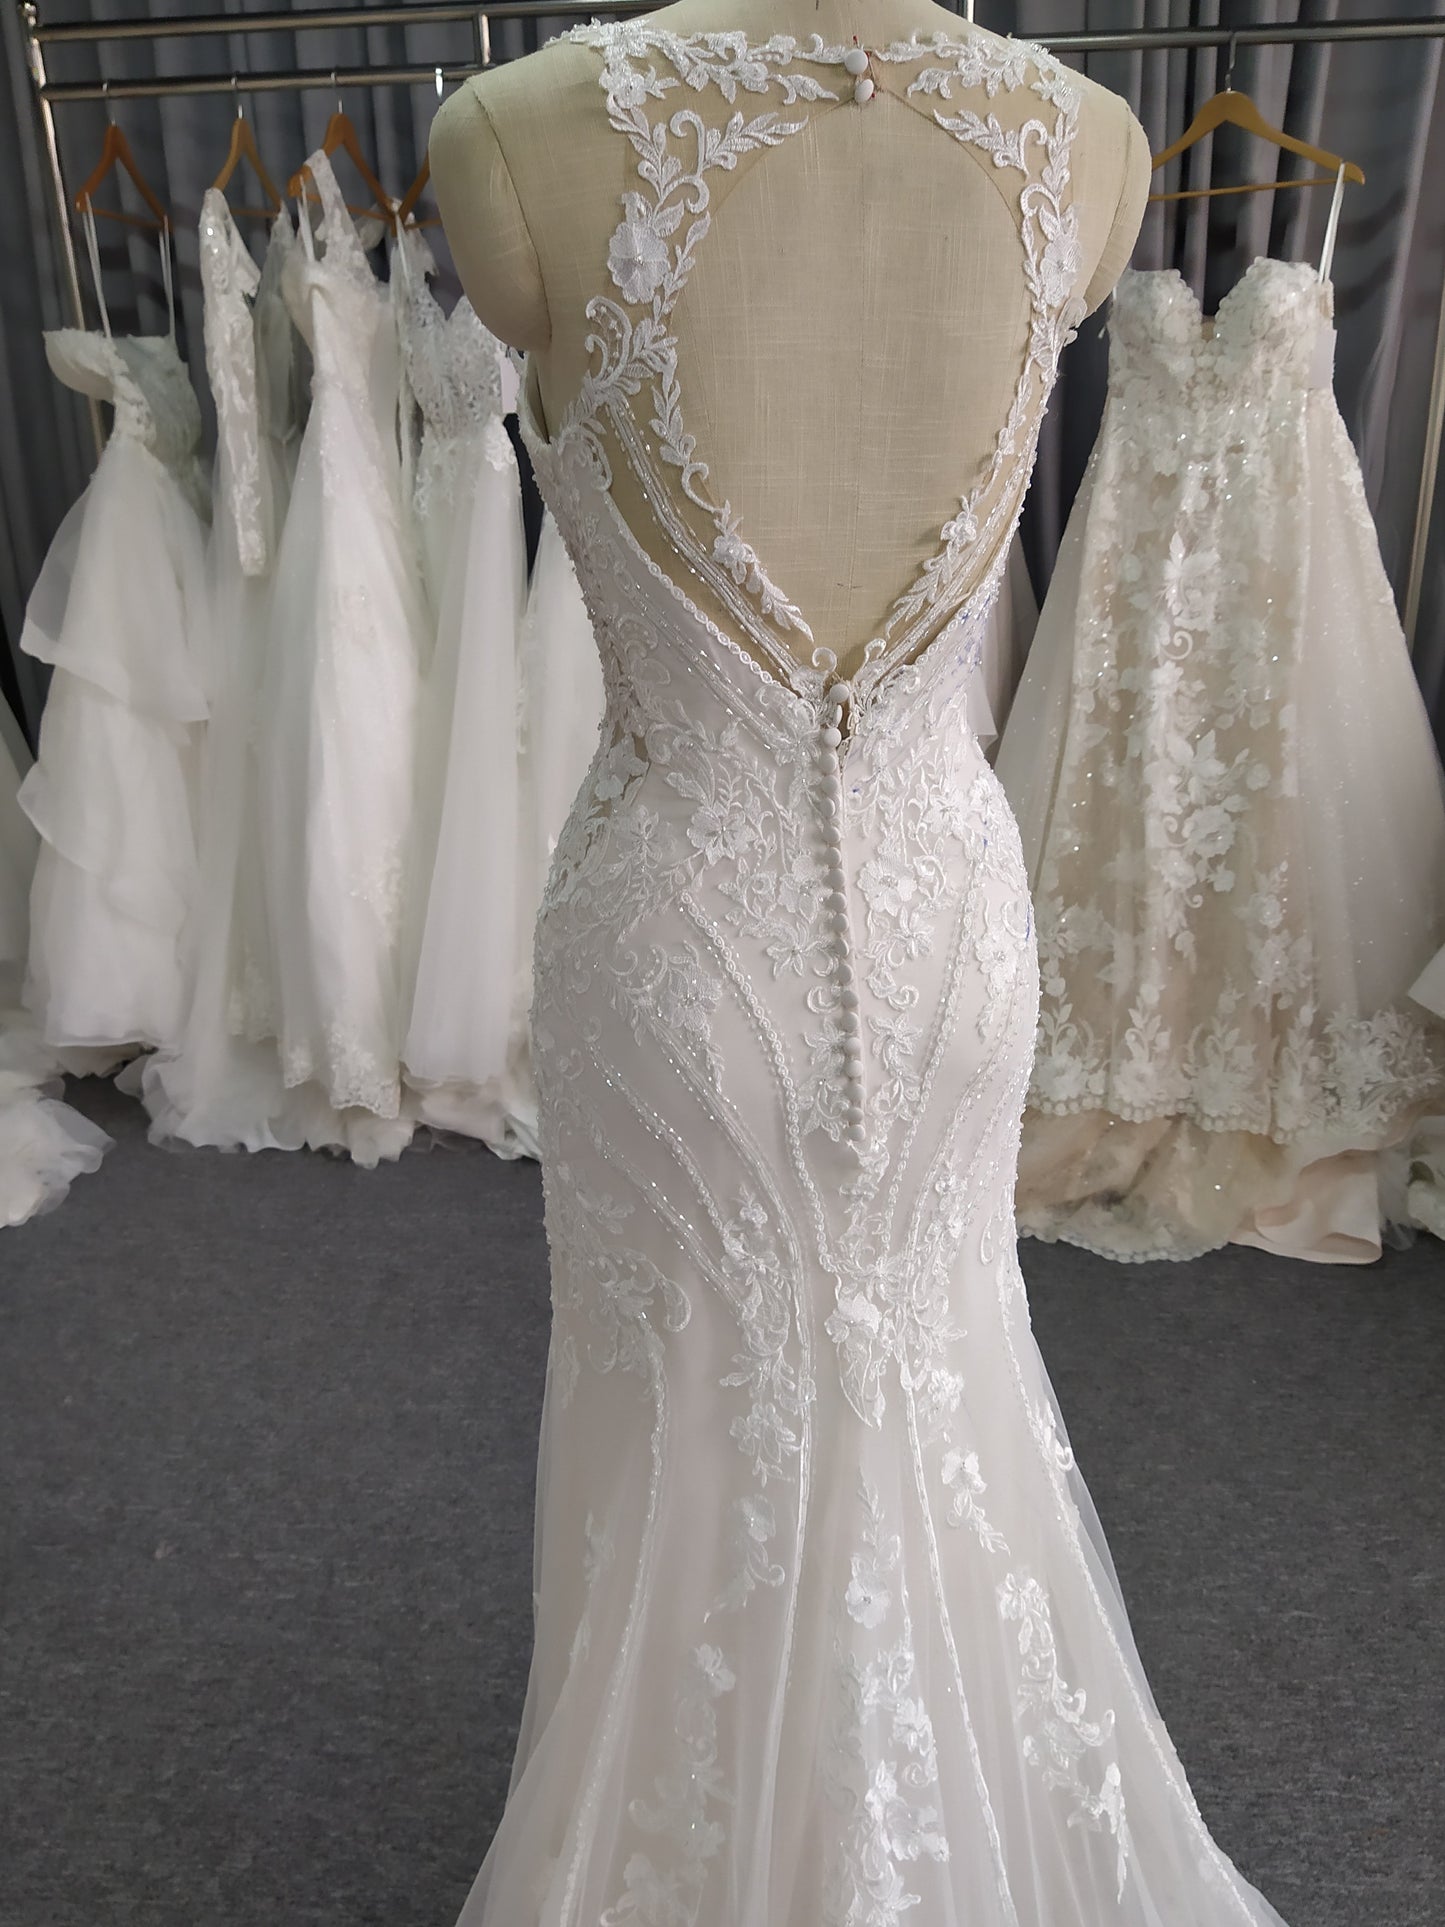 Mermaid V-neck Sweep Train Wedding Dresses With Lace